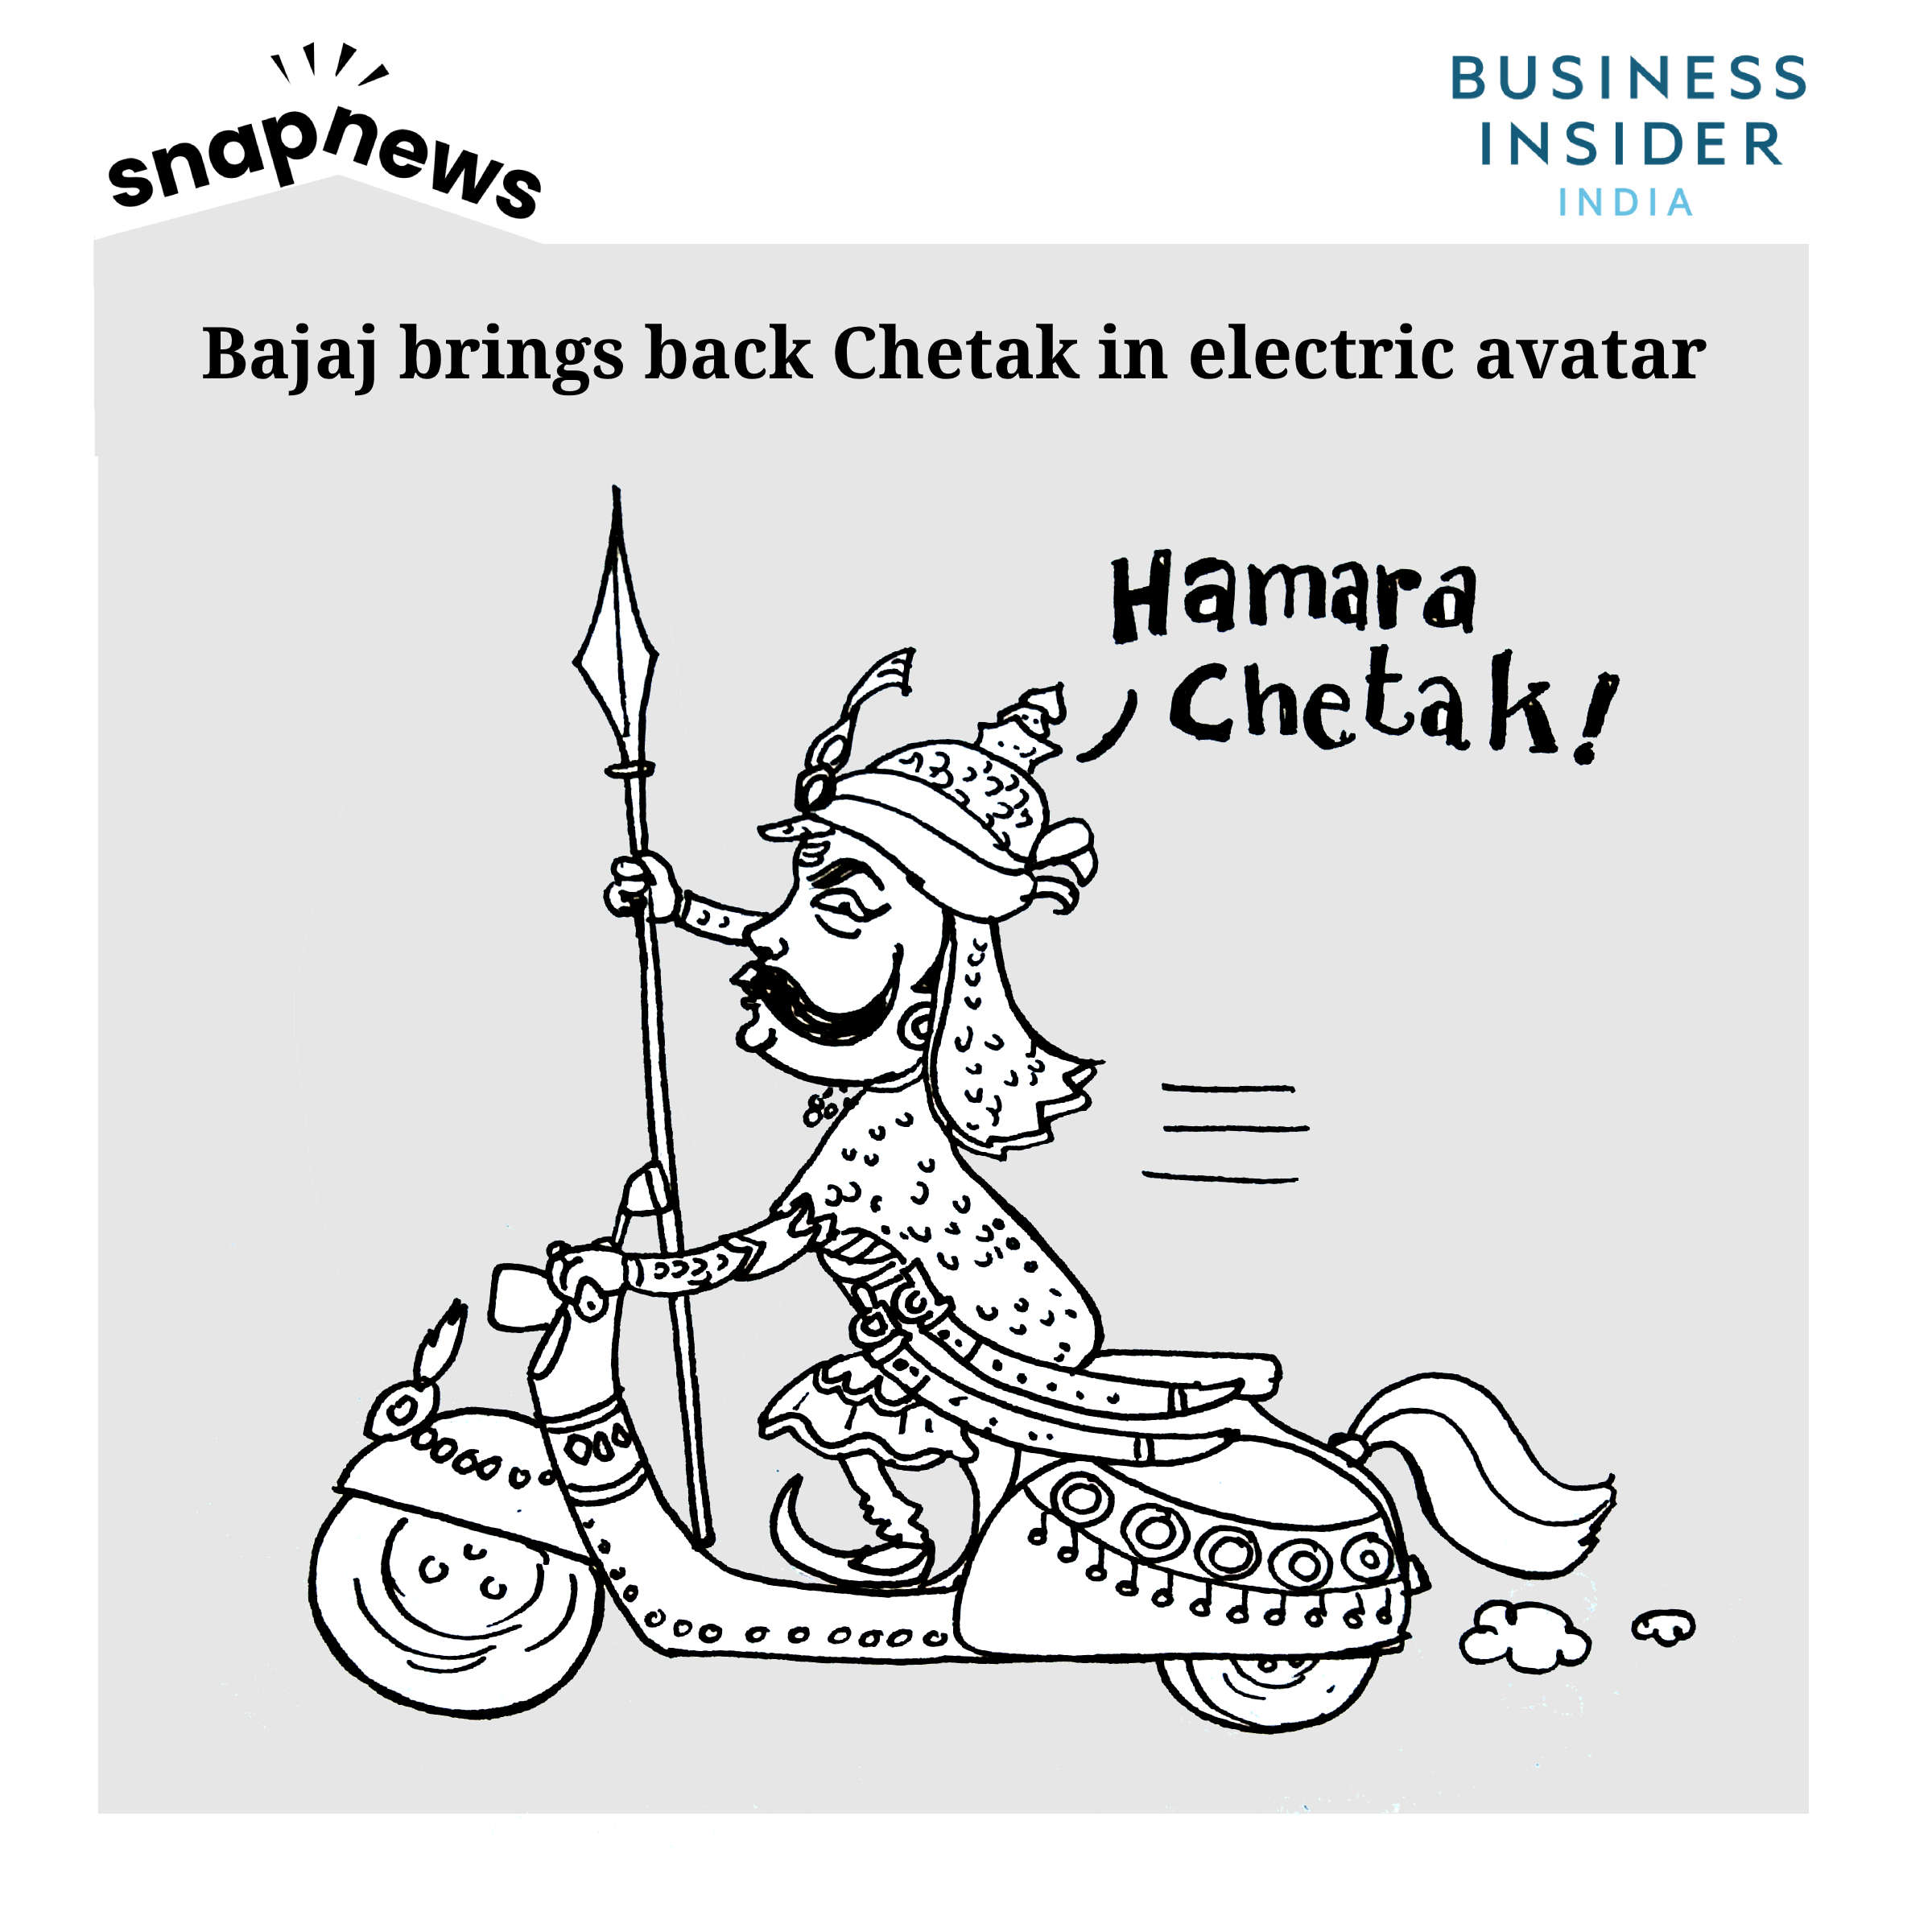 A 79-year iconic scooter brand is taking an electric avatar - but it will not be called Bajaj - Business Insider India